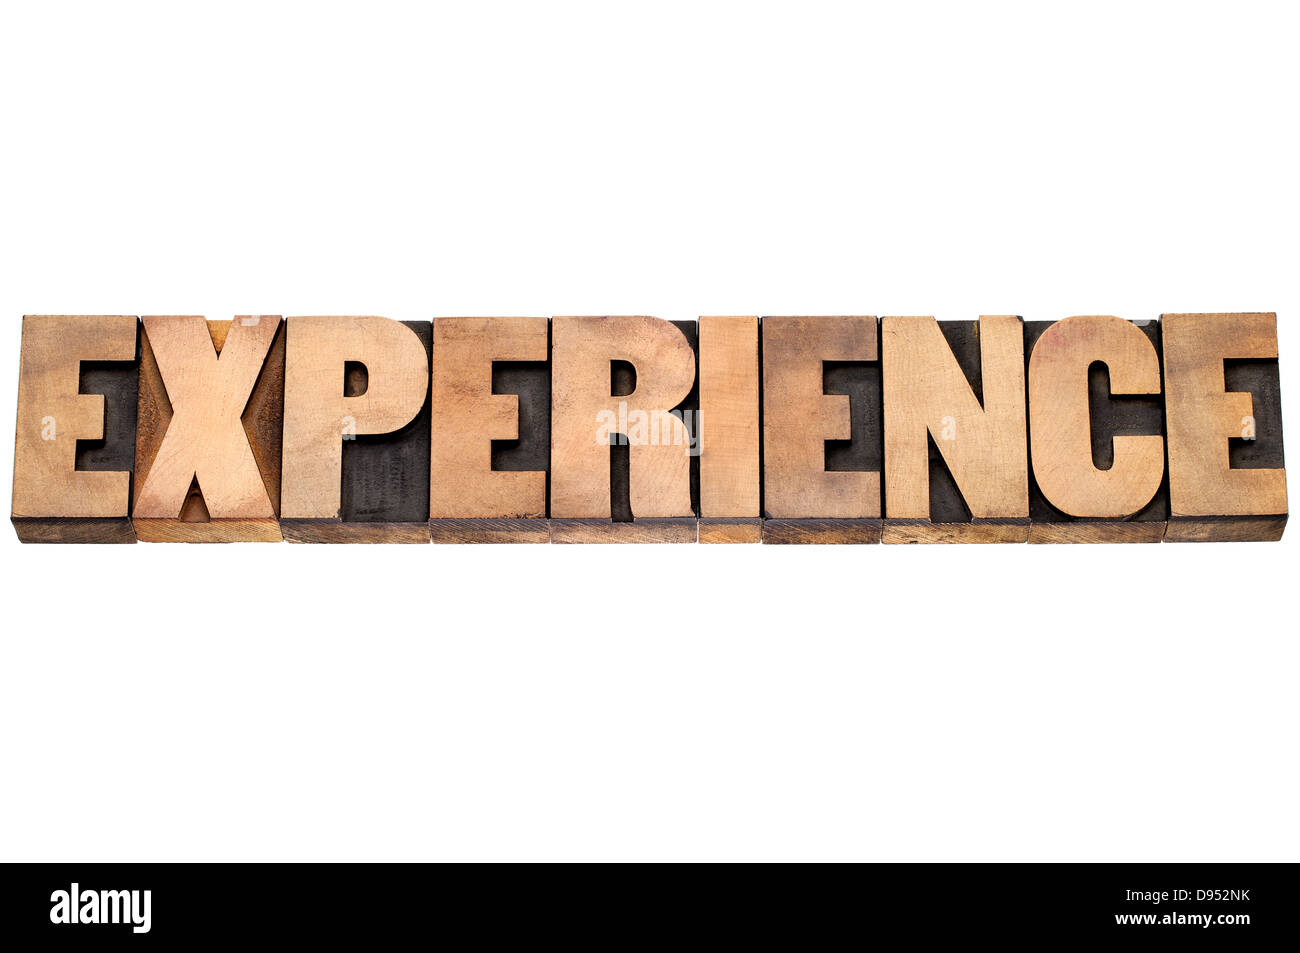 experience - isolated text in letterpress wood type Stock Photo